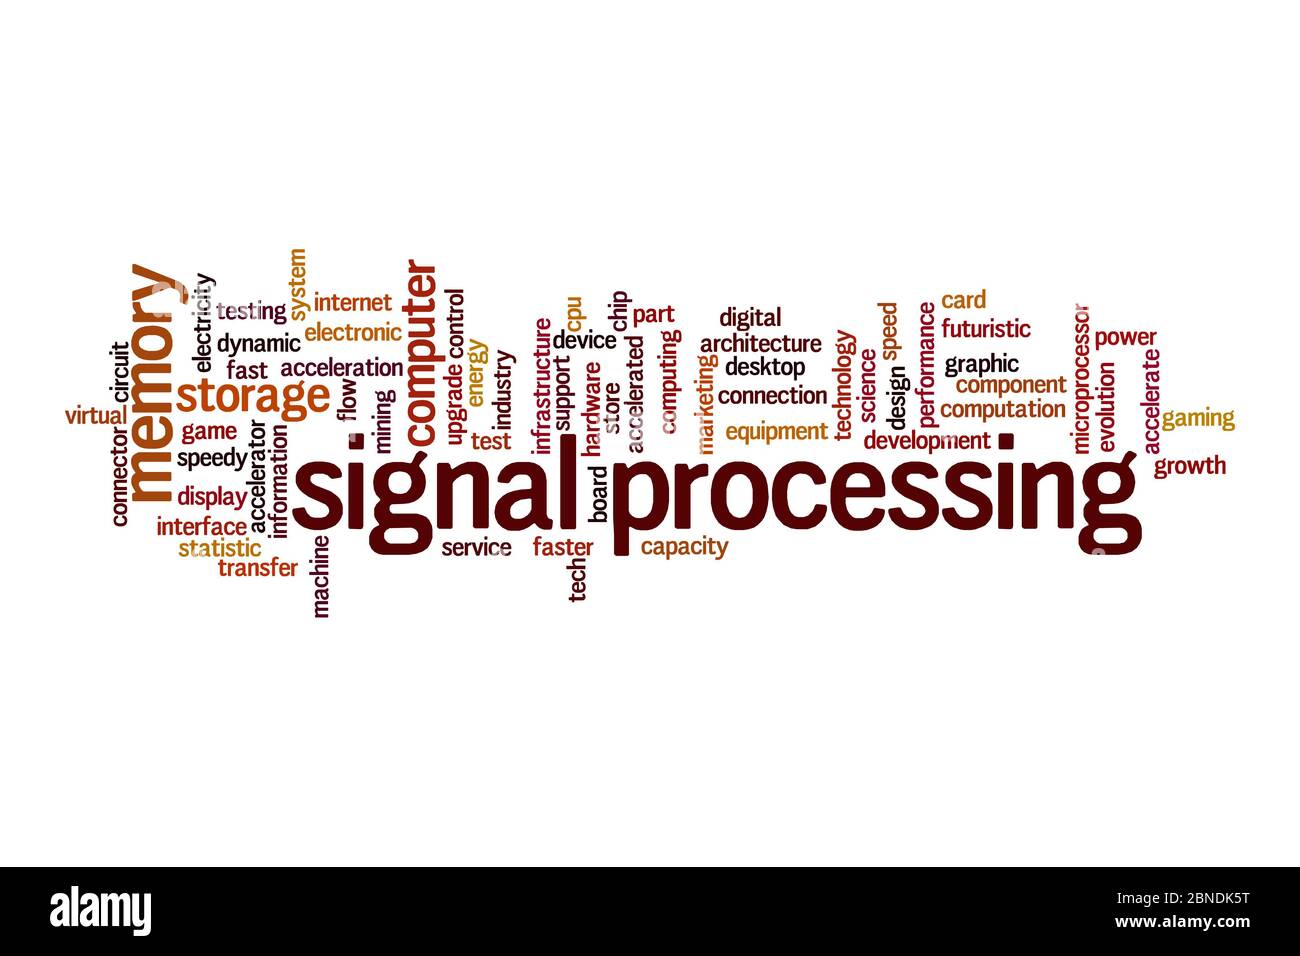 Signal processing cloud concept on white background Stock Photo